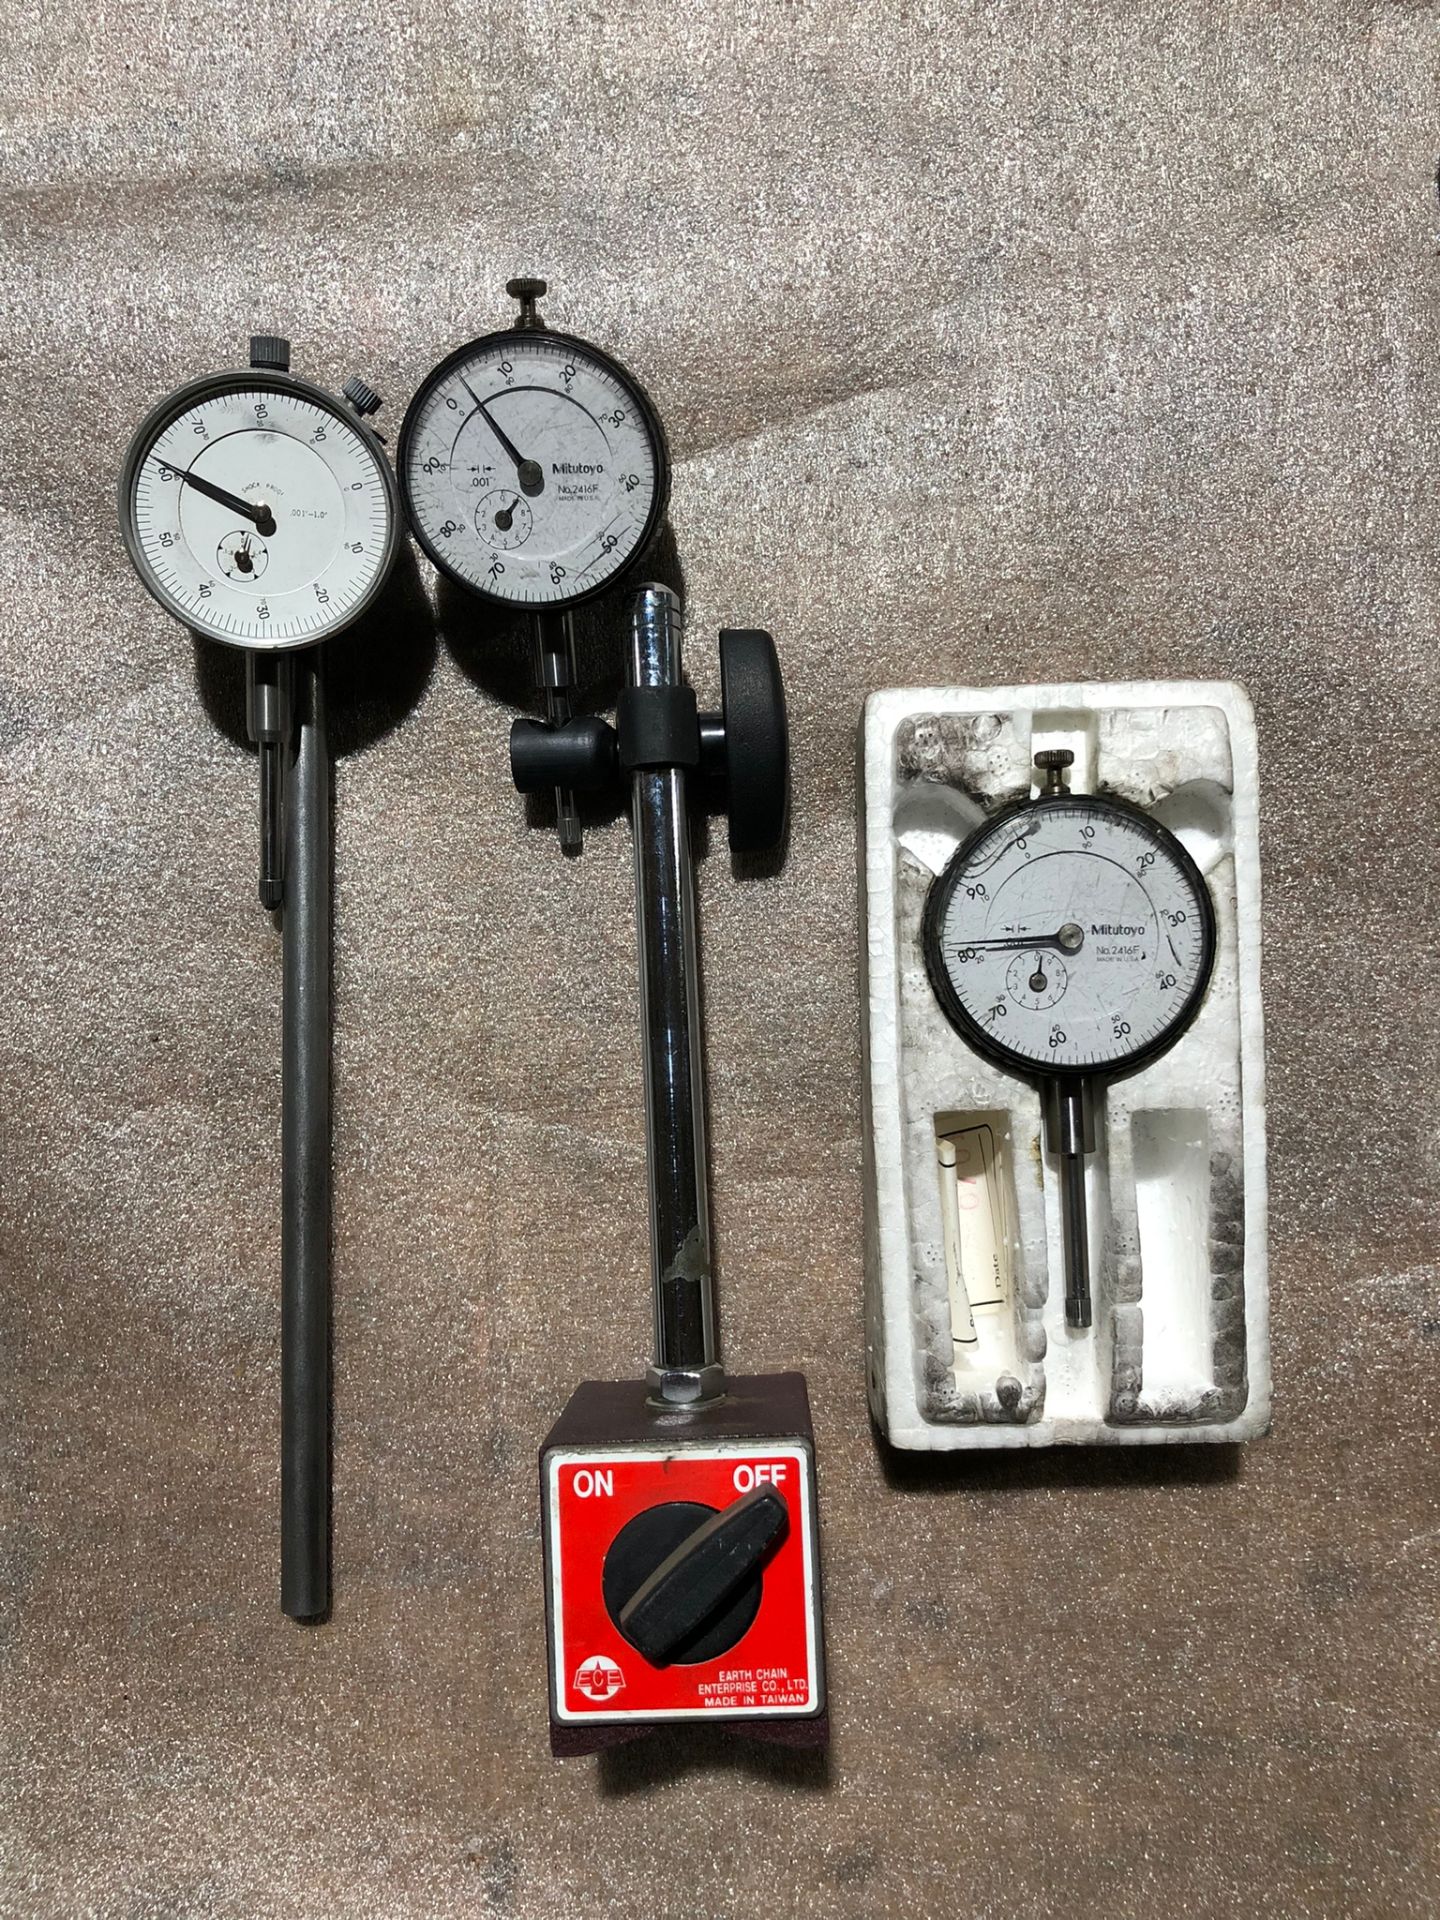 Lot of 3 (3 units) Mitutoyo Dial Indicator Units with magnetic base stand